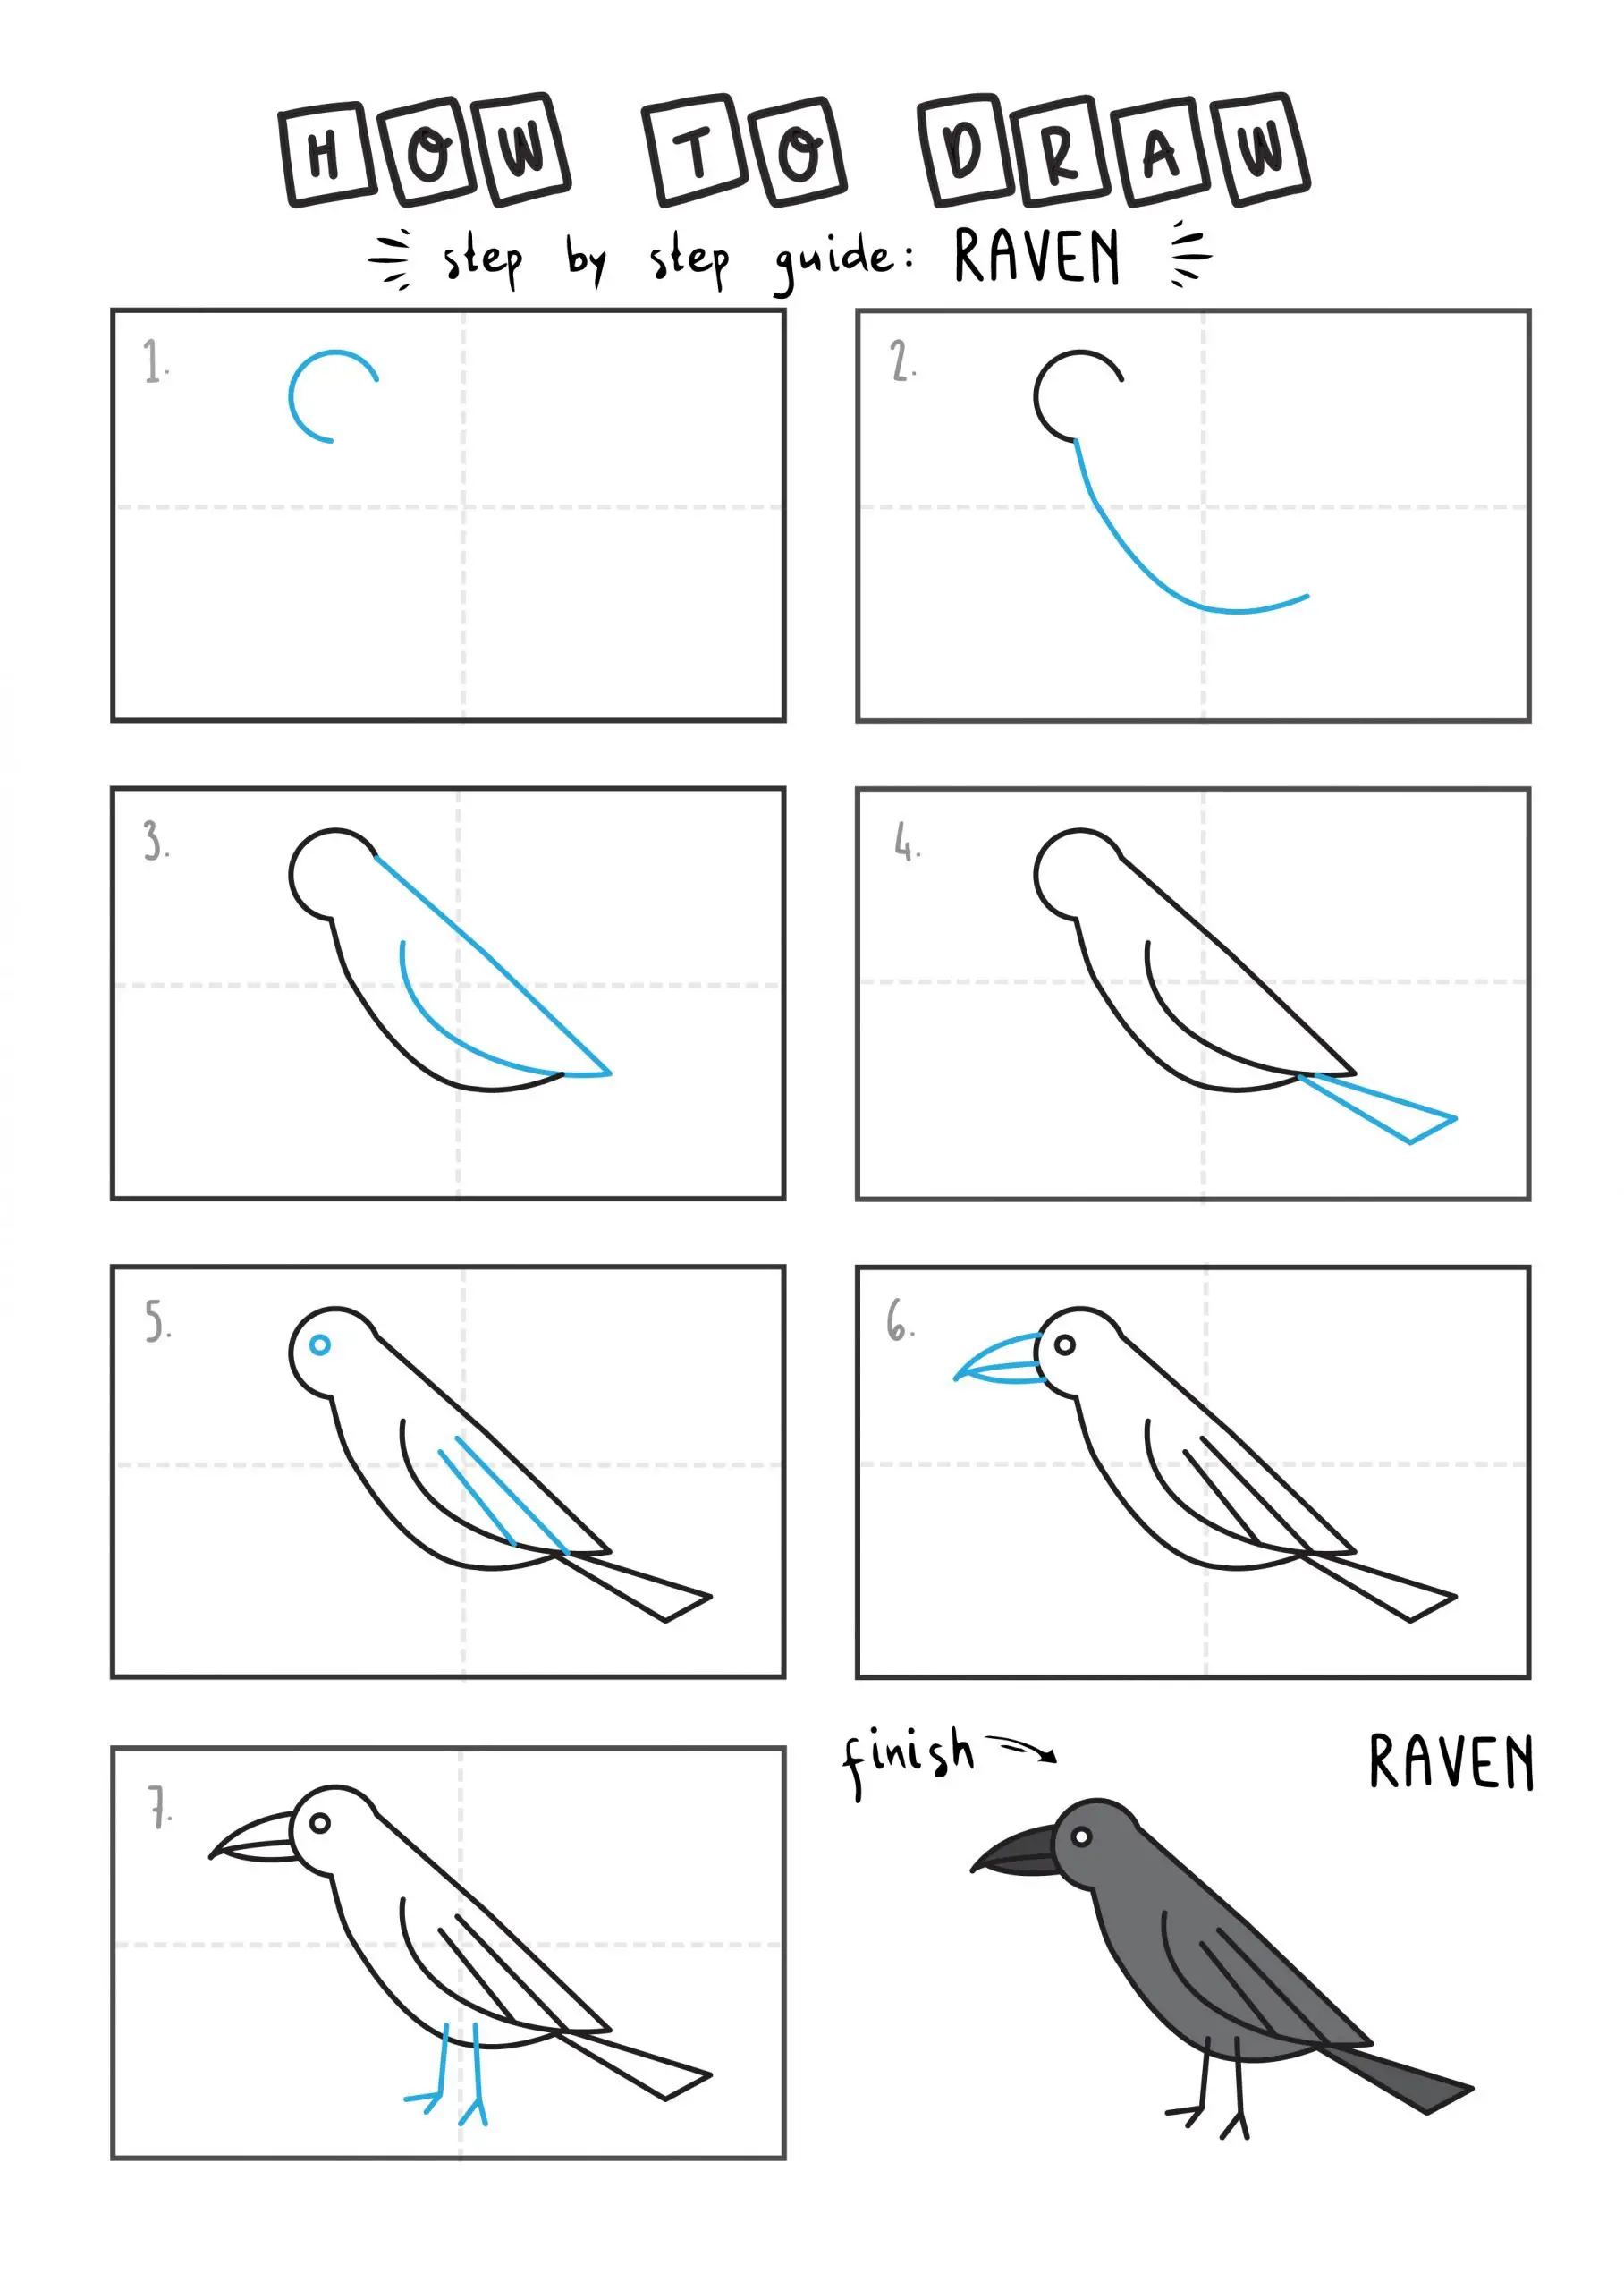 How To Draw RAVEN BLACK BIRD STEP By Step For Kids Easy Illustration Doodle Drawing GUIDE ANIMAL (2)